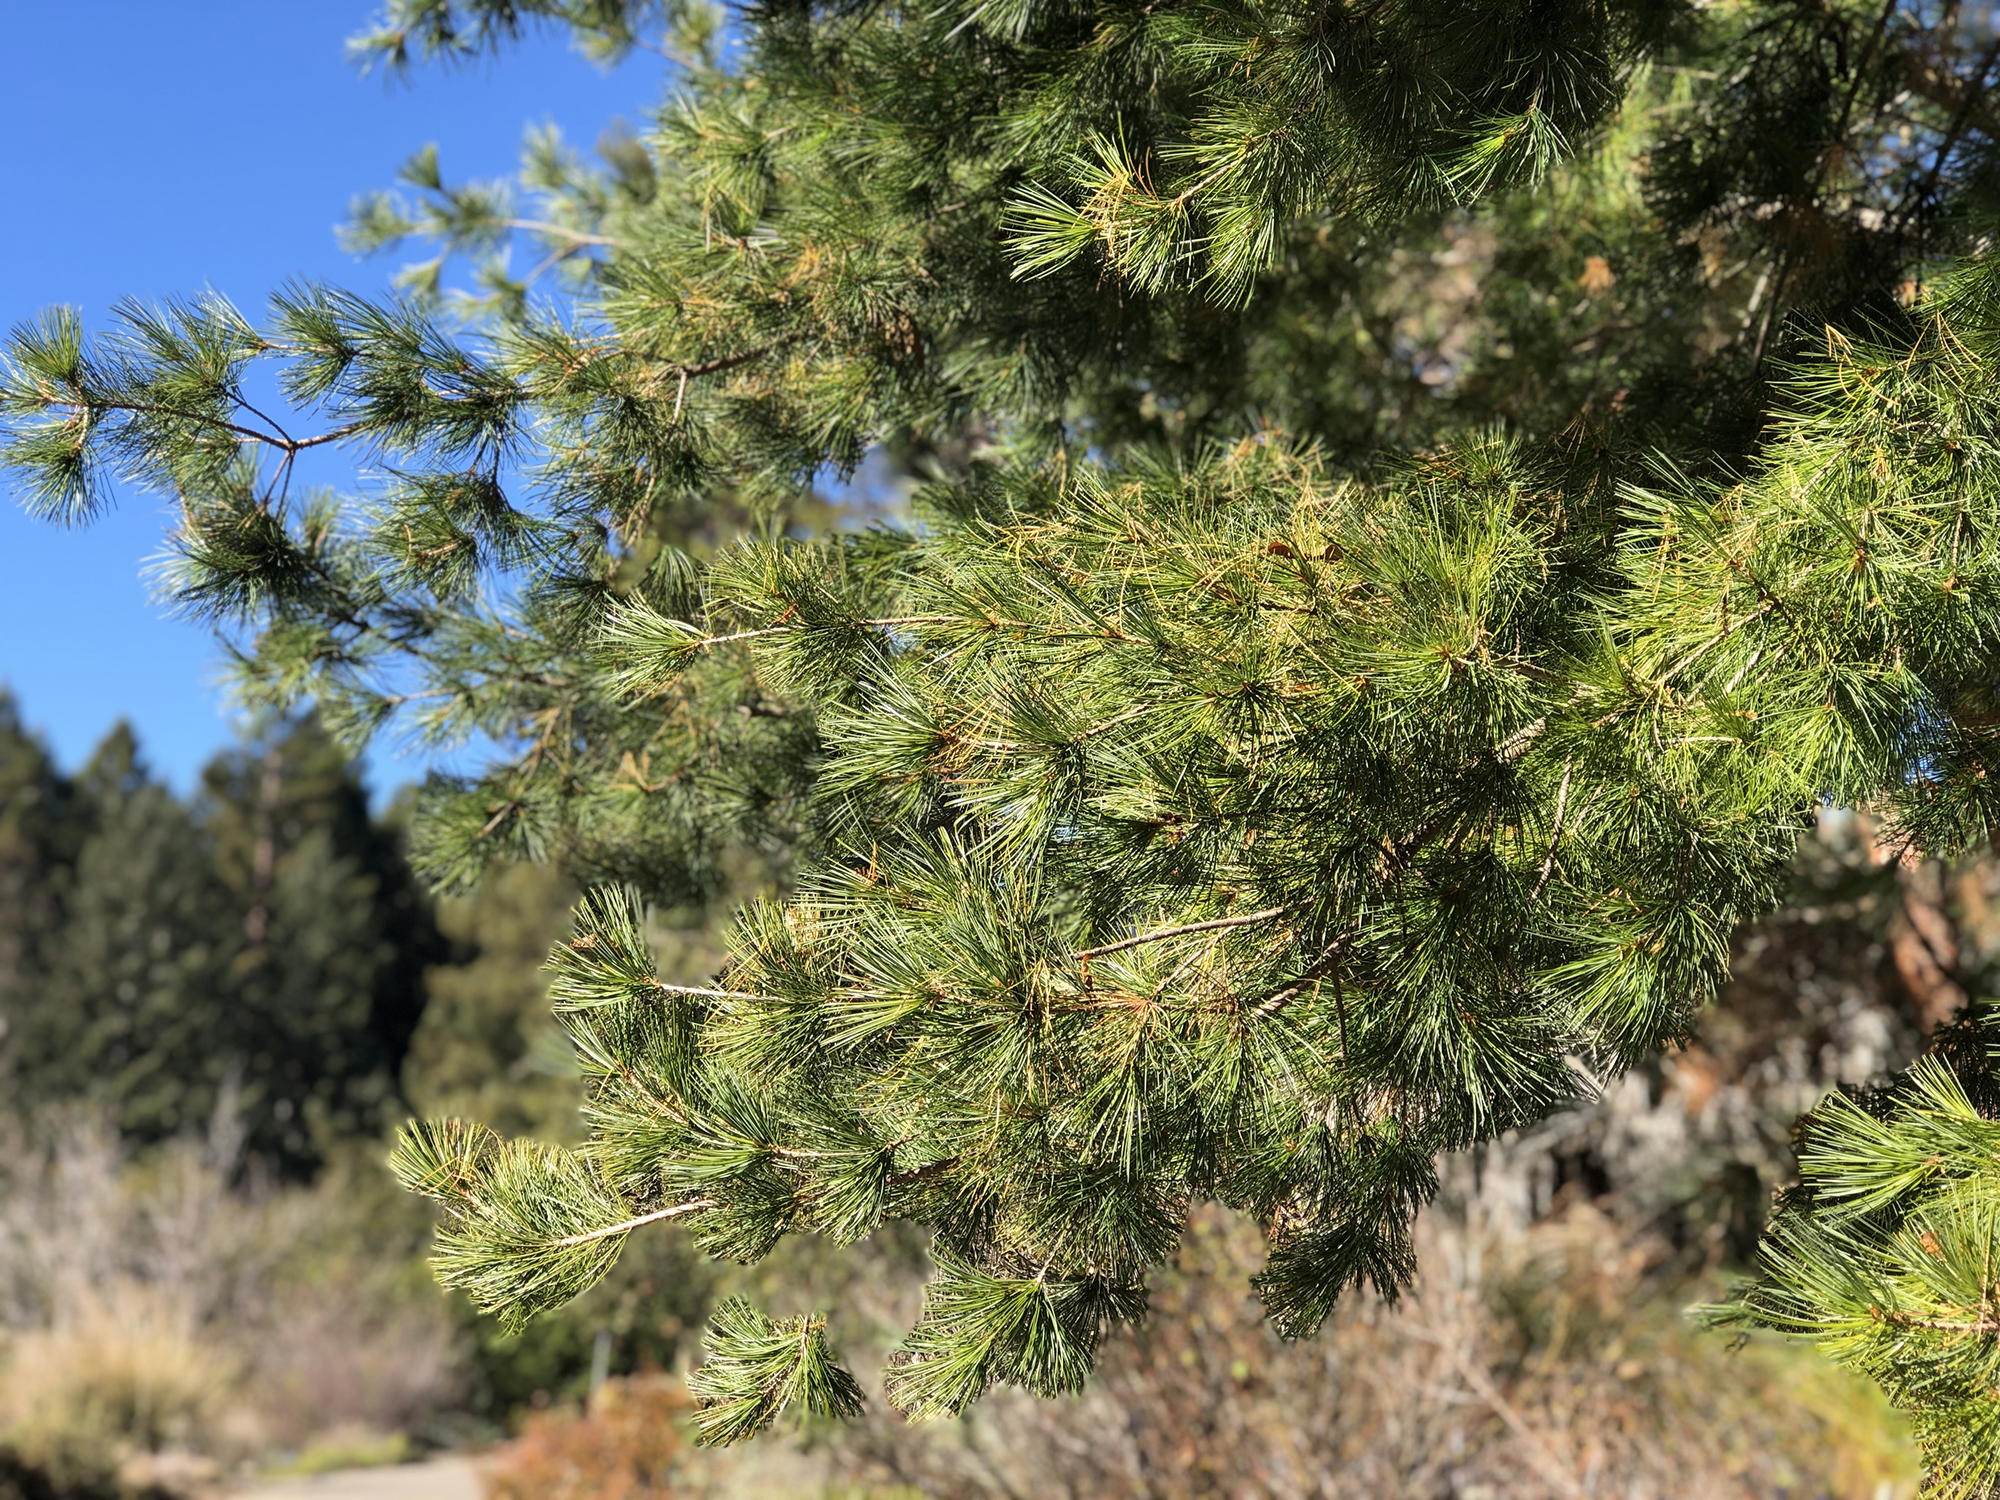 An image of a tree with pine needles